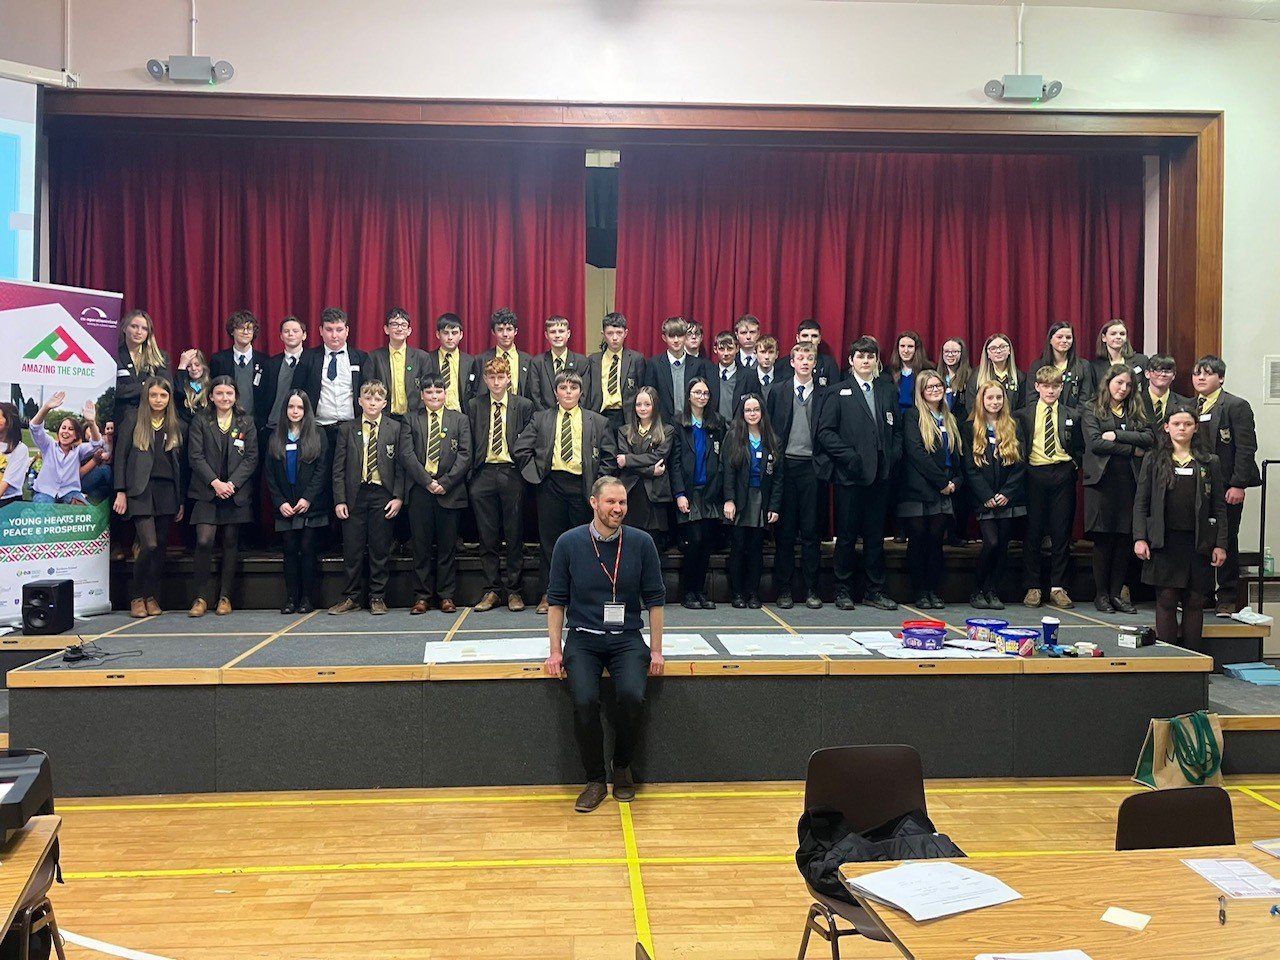 Ballycastle High School &amp; Cross Passion – ‘Amazing The Space’ Shared Education 2022/23 